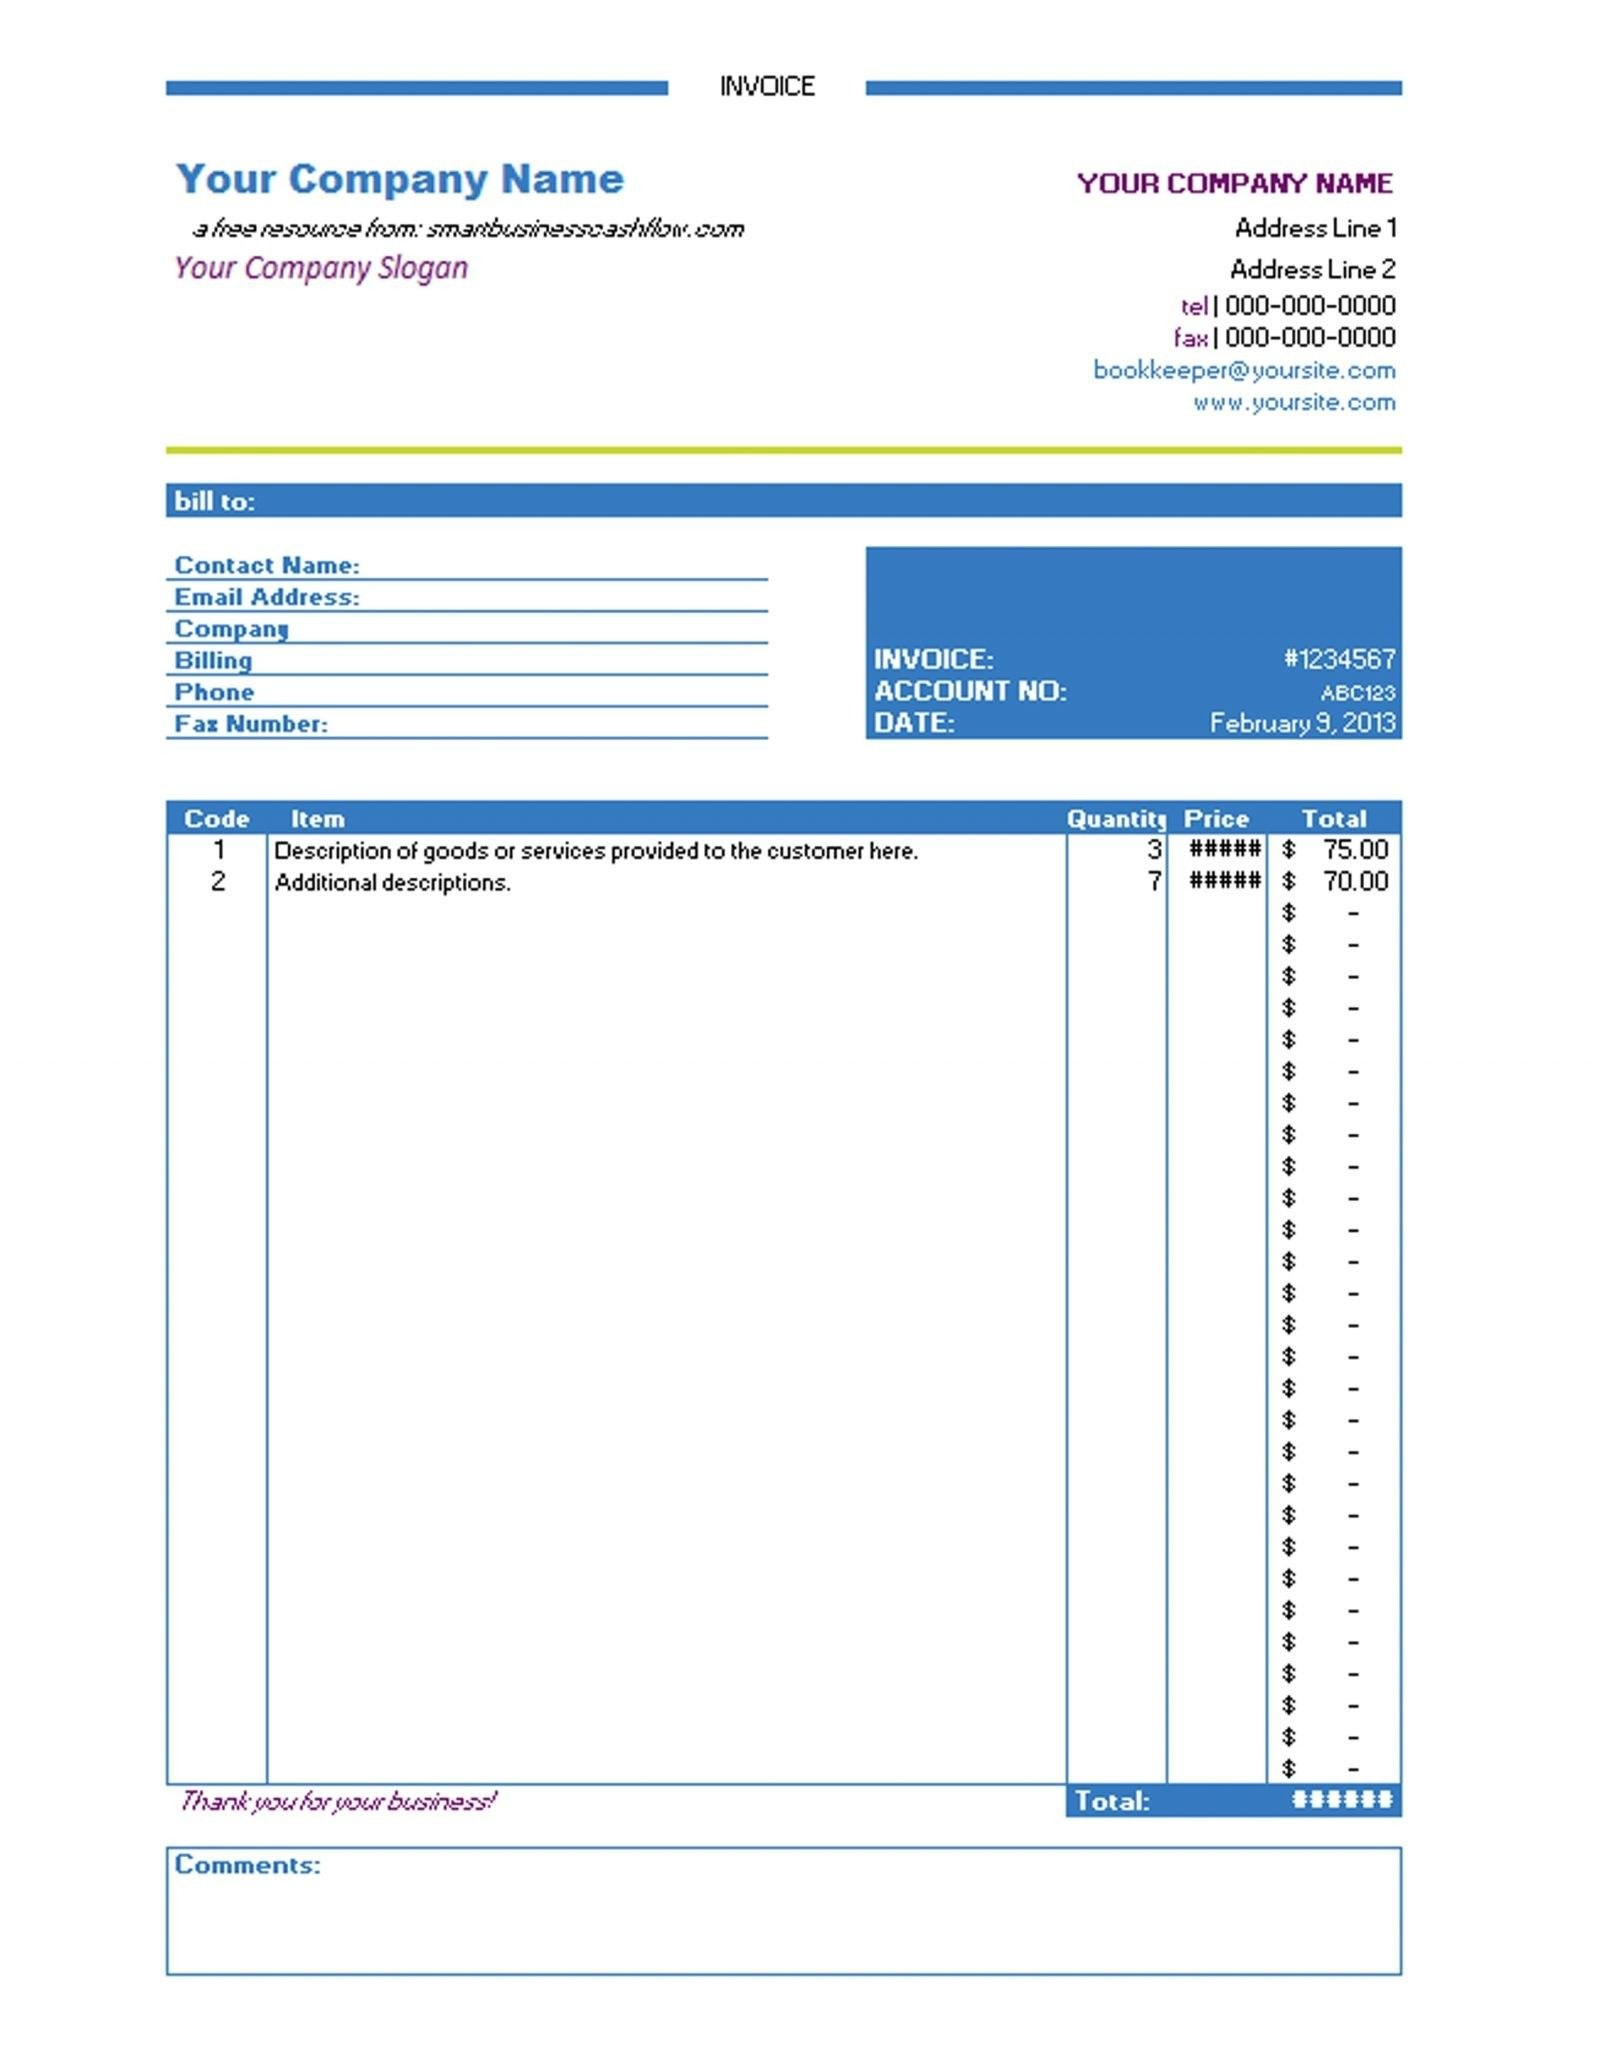 New Contractor Invoice Template Excel Xlstemplate Xlsformats with regard to Invoice Template Excel 2013